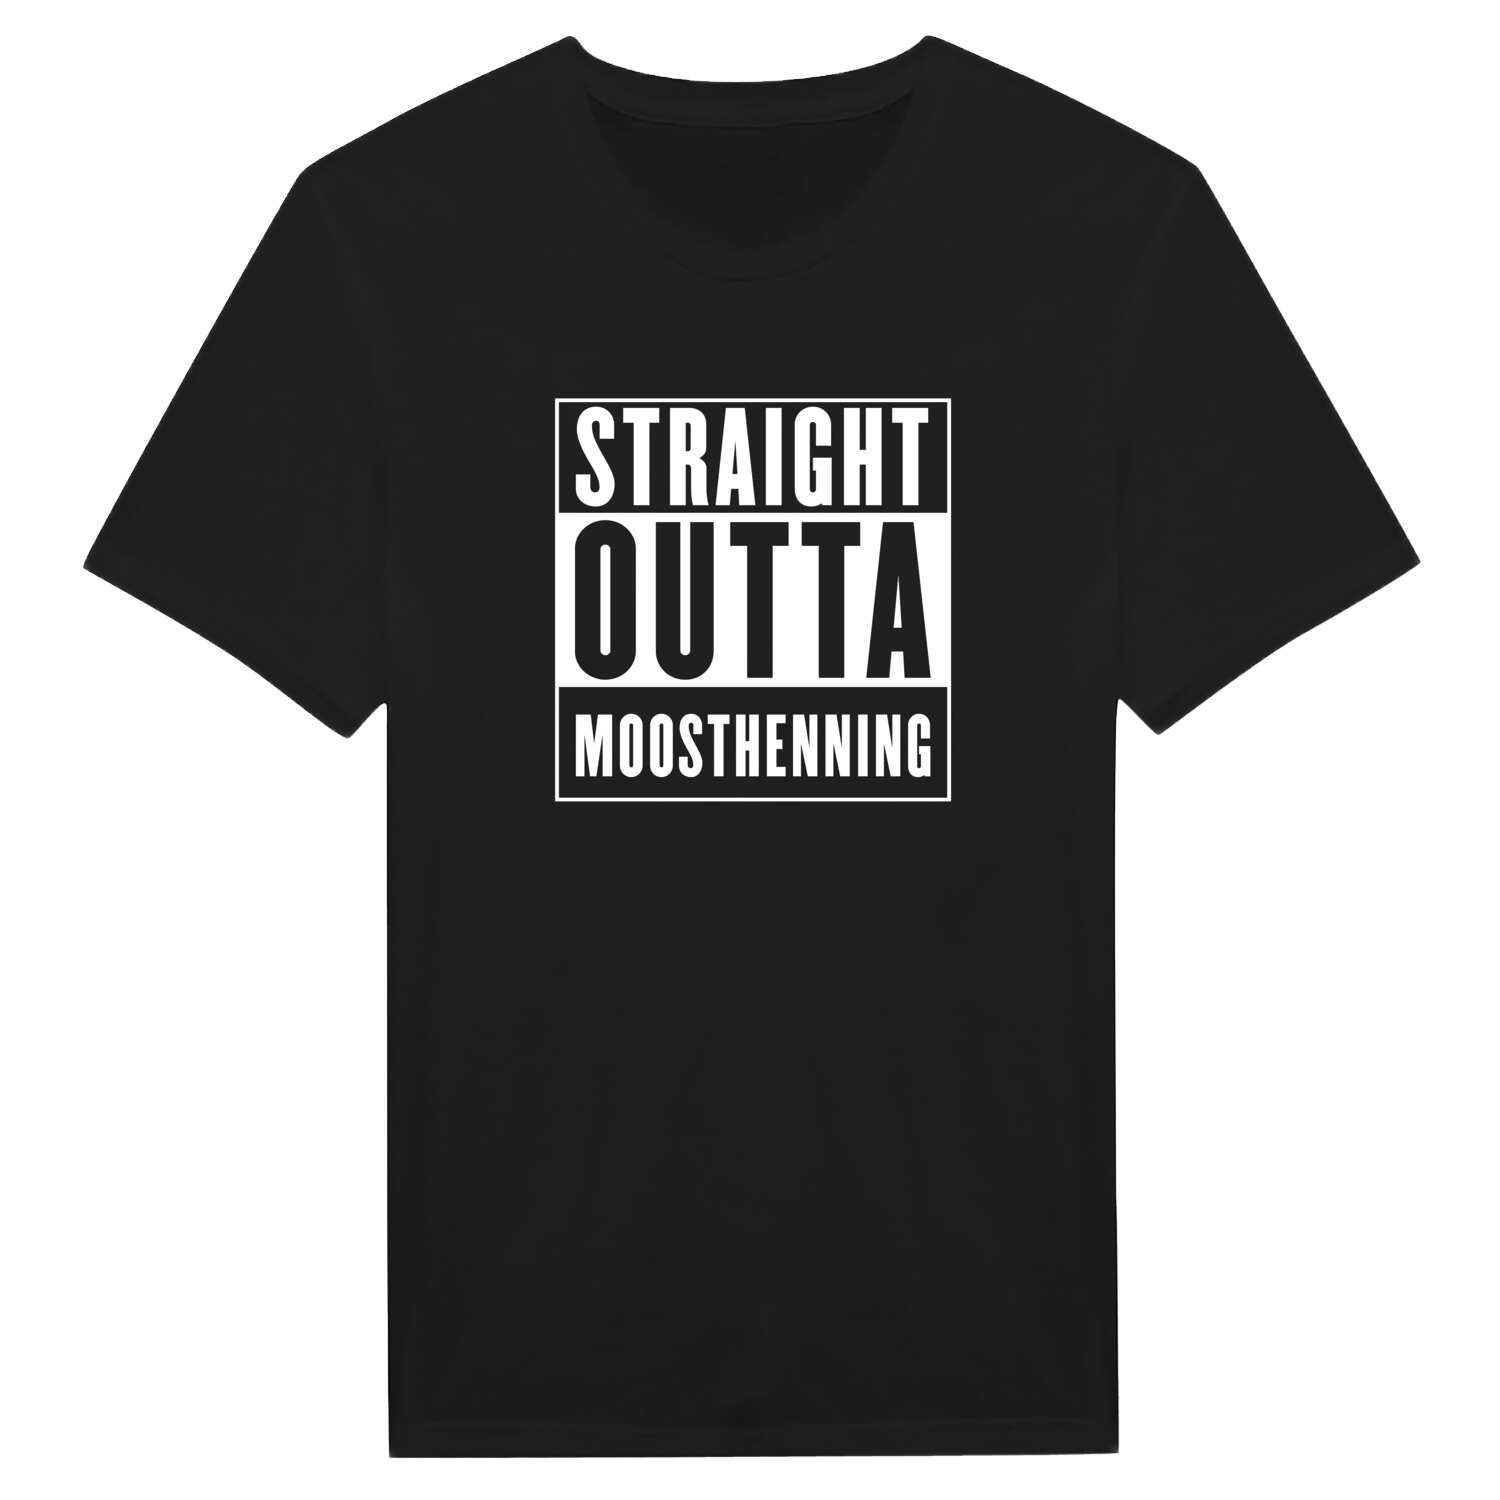 Moosthenning T-Shirt »Straight Outta«